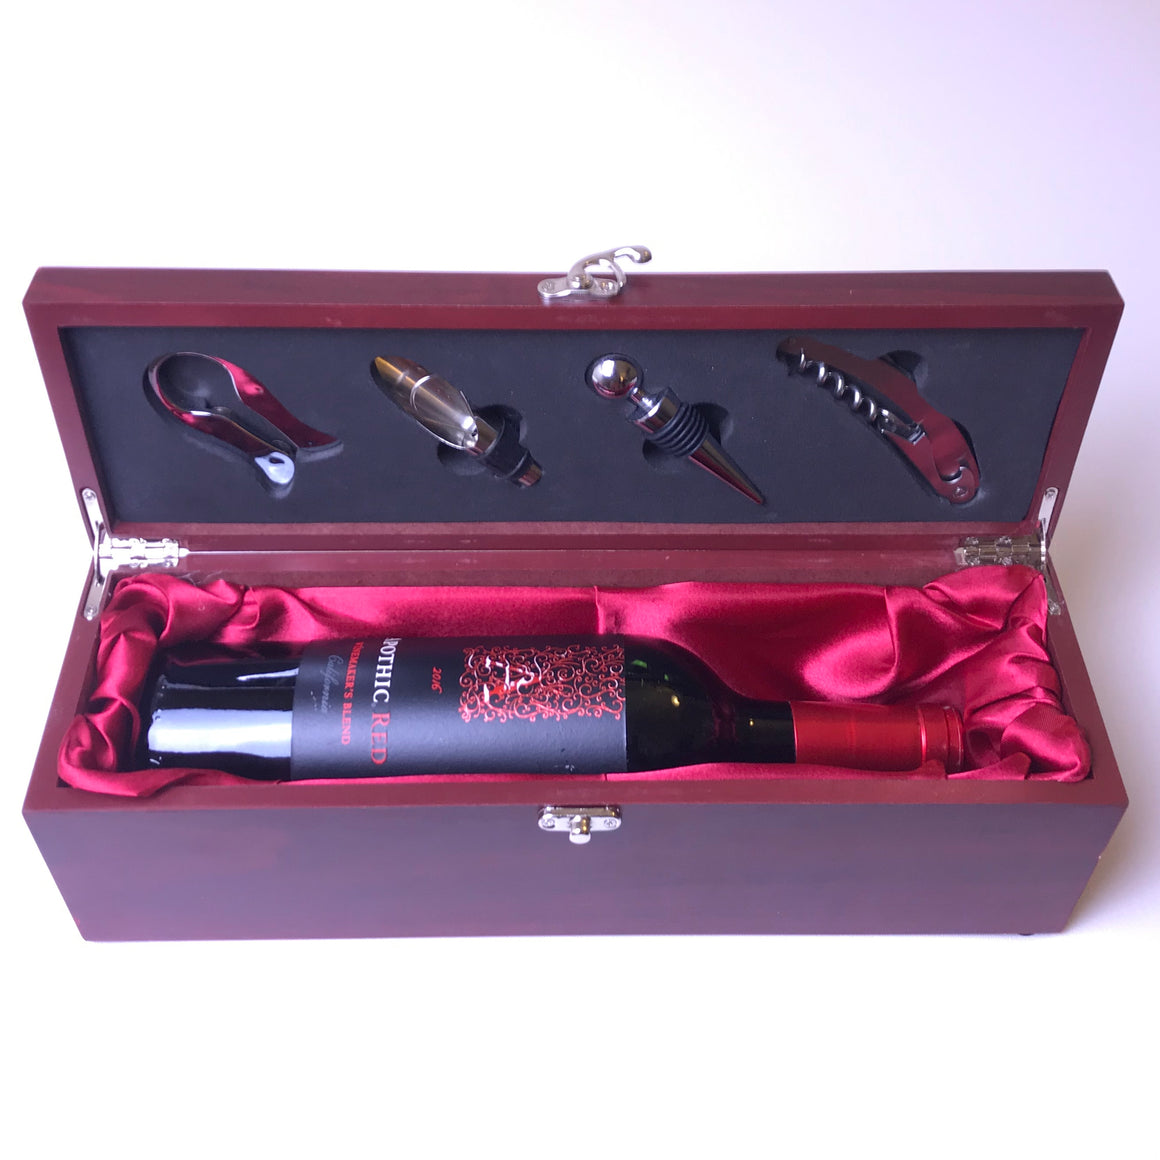 Wine box with tools- Rumi poem - Persian Calligraphy Valentine gift- Rosewood Finish